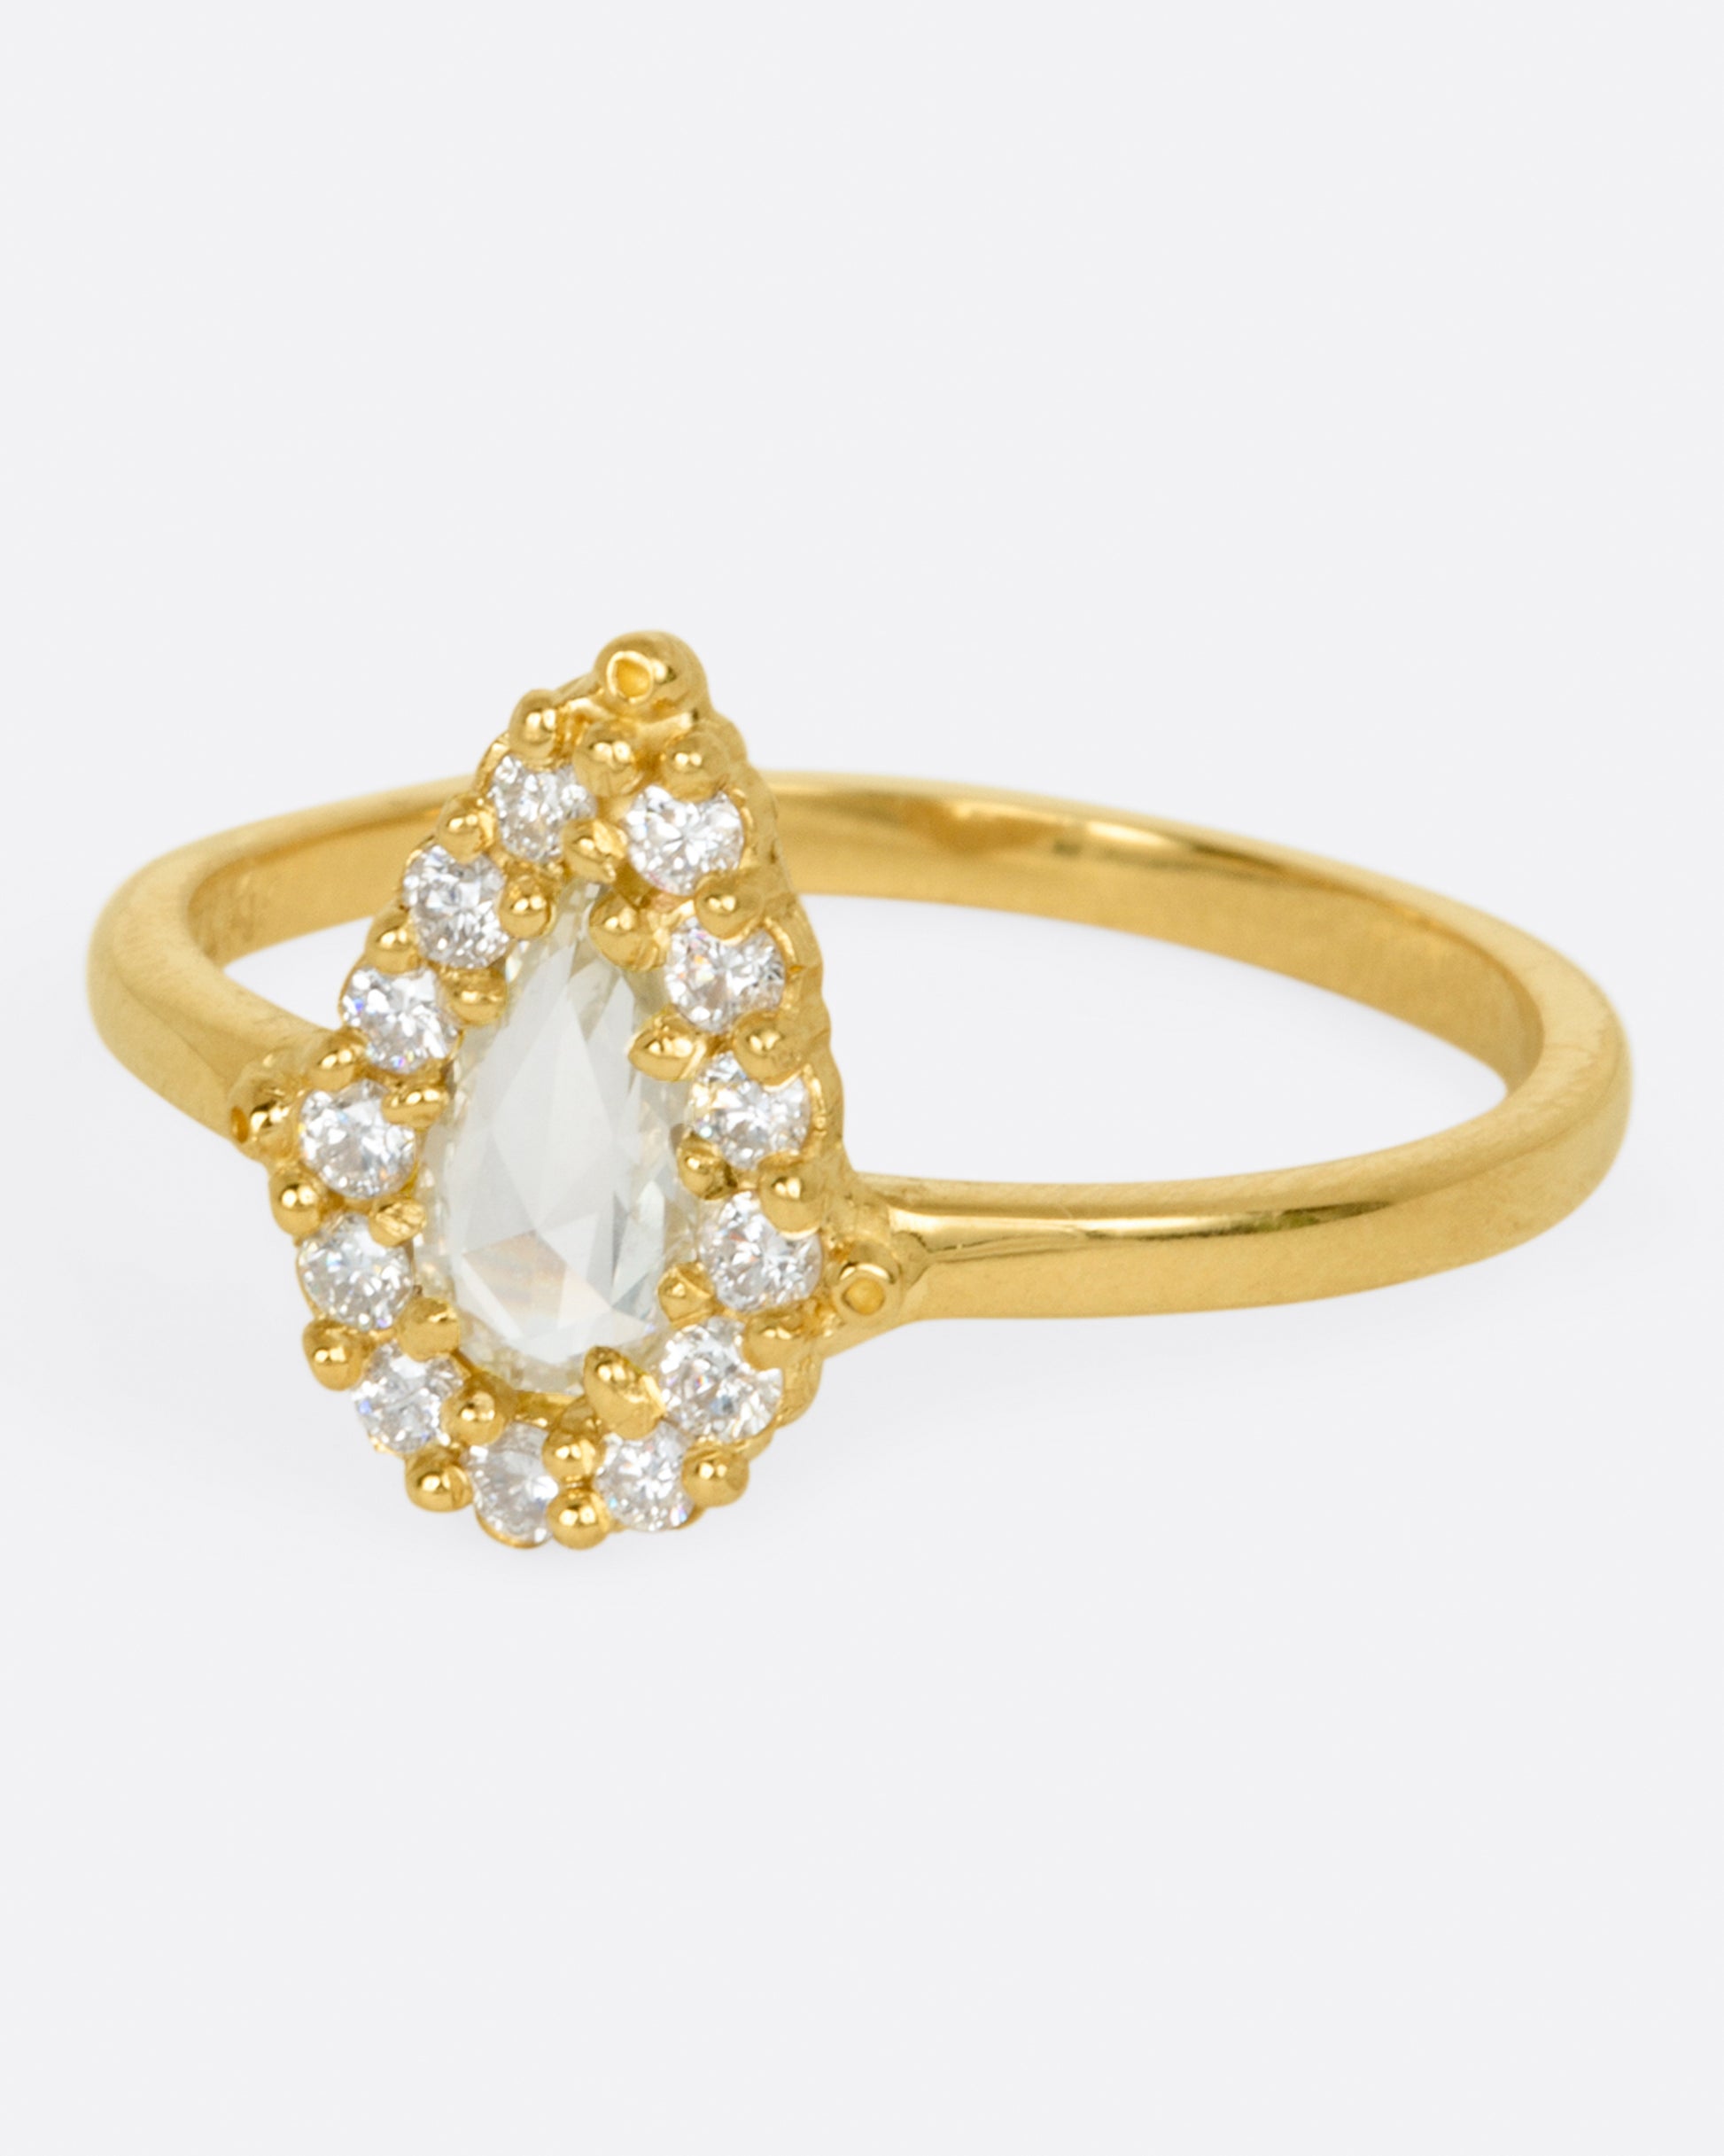 A light champagne, rose cut, pear shaped diamond ring with a round diamond halo.